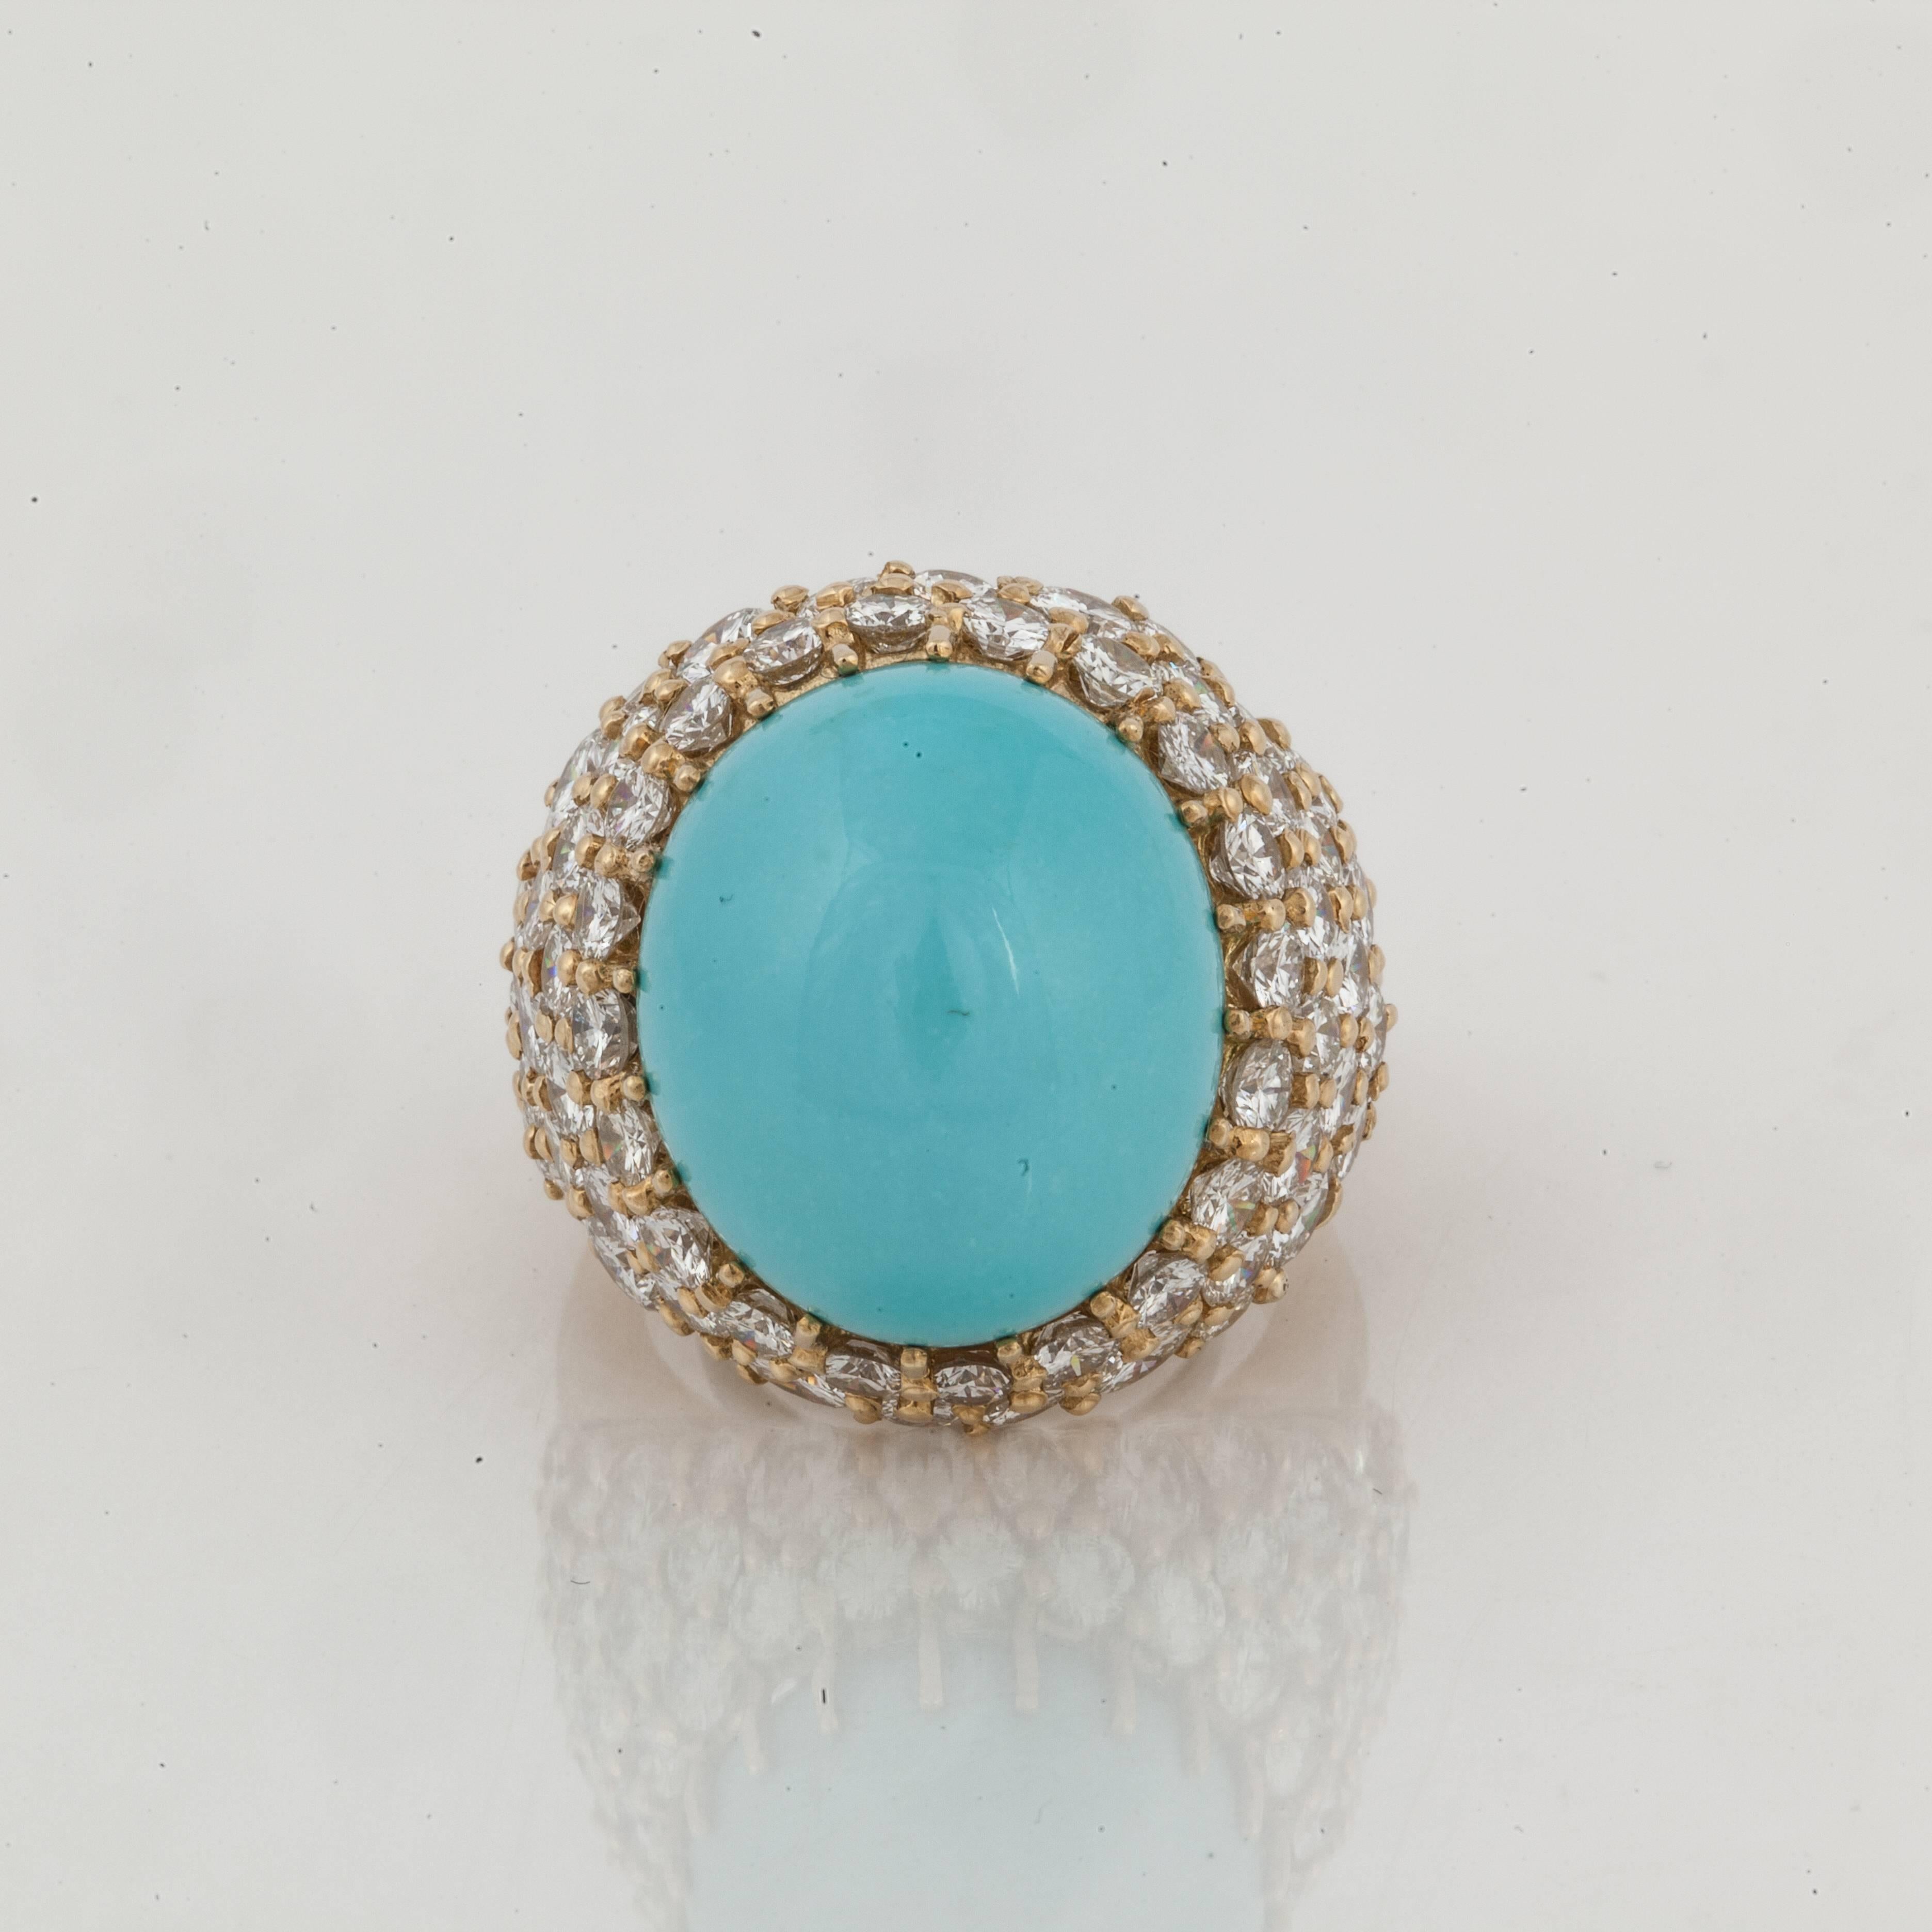 18K yellow gold featuring a large cabochon turquoise stone weighing 33 carats with72 round diamonds that total 11 carats, F-G color and VS1-2 clarity.  Presentation area is 1 inch by 1 inch and it stands 7/8 inches off the finger.  Currently a size